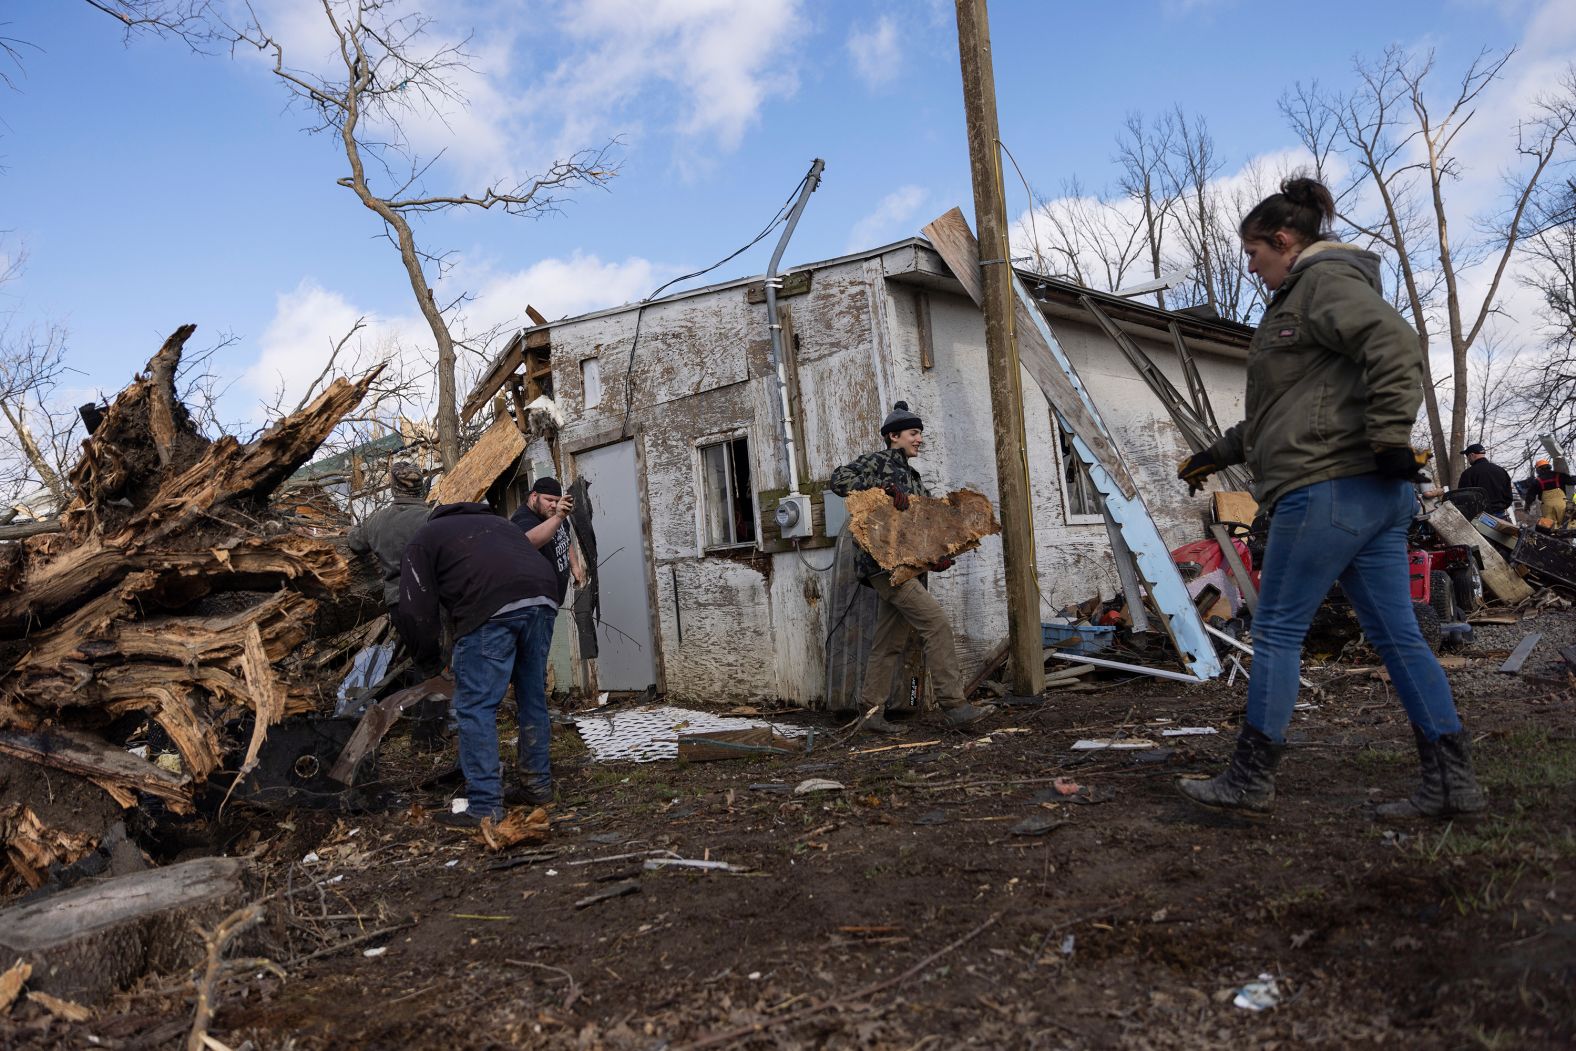 People clean up in the aftermath of a tornado in Lakeview, Ohio, on Friday, March 15. <a href="index.php?page=&url=https%3A%2F%2Fwww.cnn.com%2F2024%2F03%2F15%2Fweather%2Findiana-ohio-storm-tornado-damage-friday%2Findex.html" target="_blank">Damaging storms and tornadoes</a> swept through Indiana and Ohio, leaving at least three people dead, destroying parts of towns and prompting search and rescue efforts, officials said.